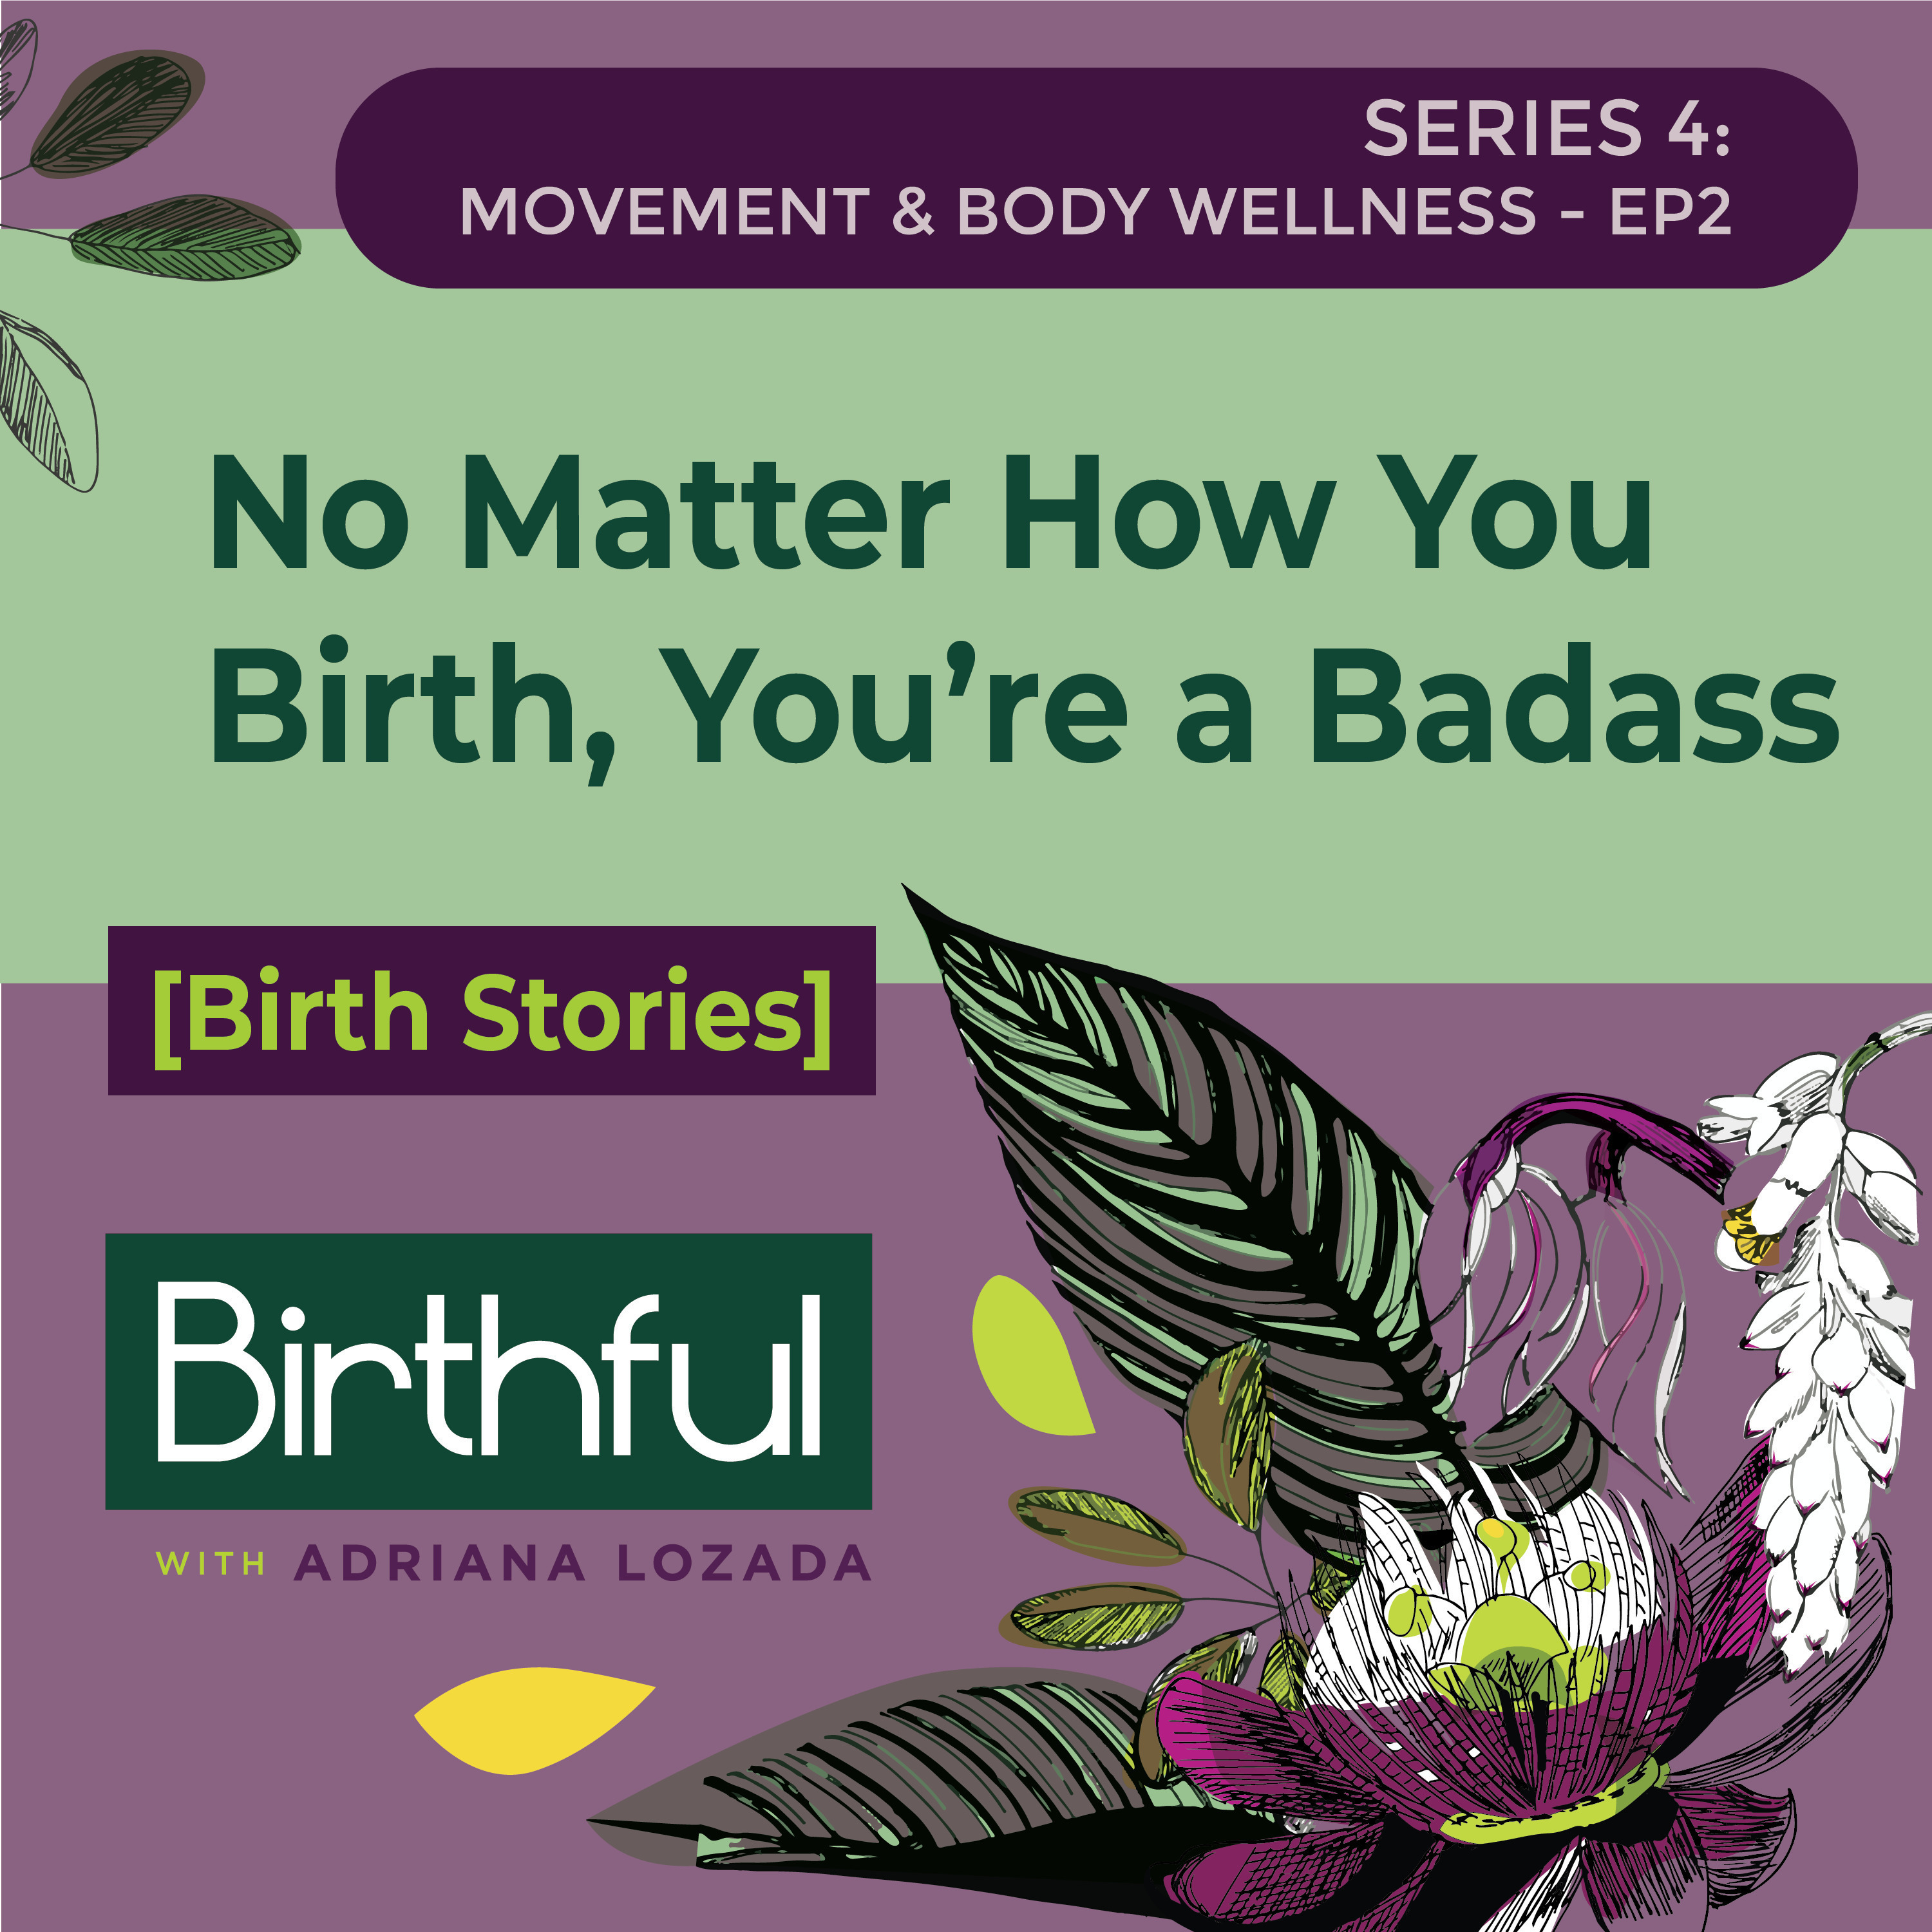 [Birth Stories] No Matter How You Birth, You’re a Badass